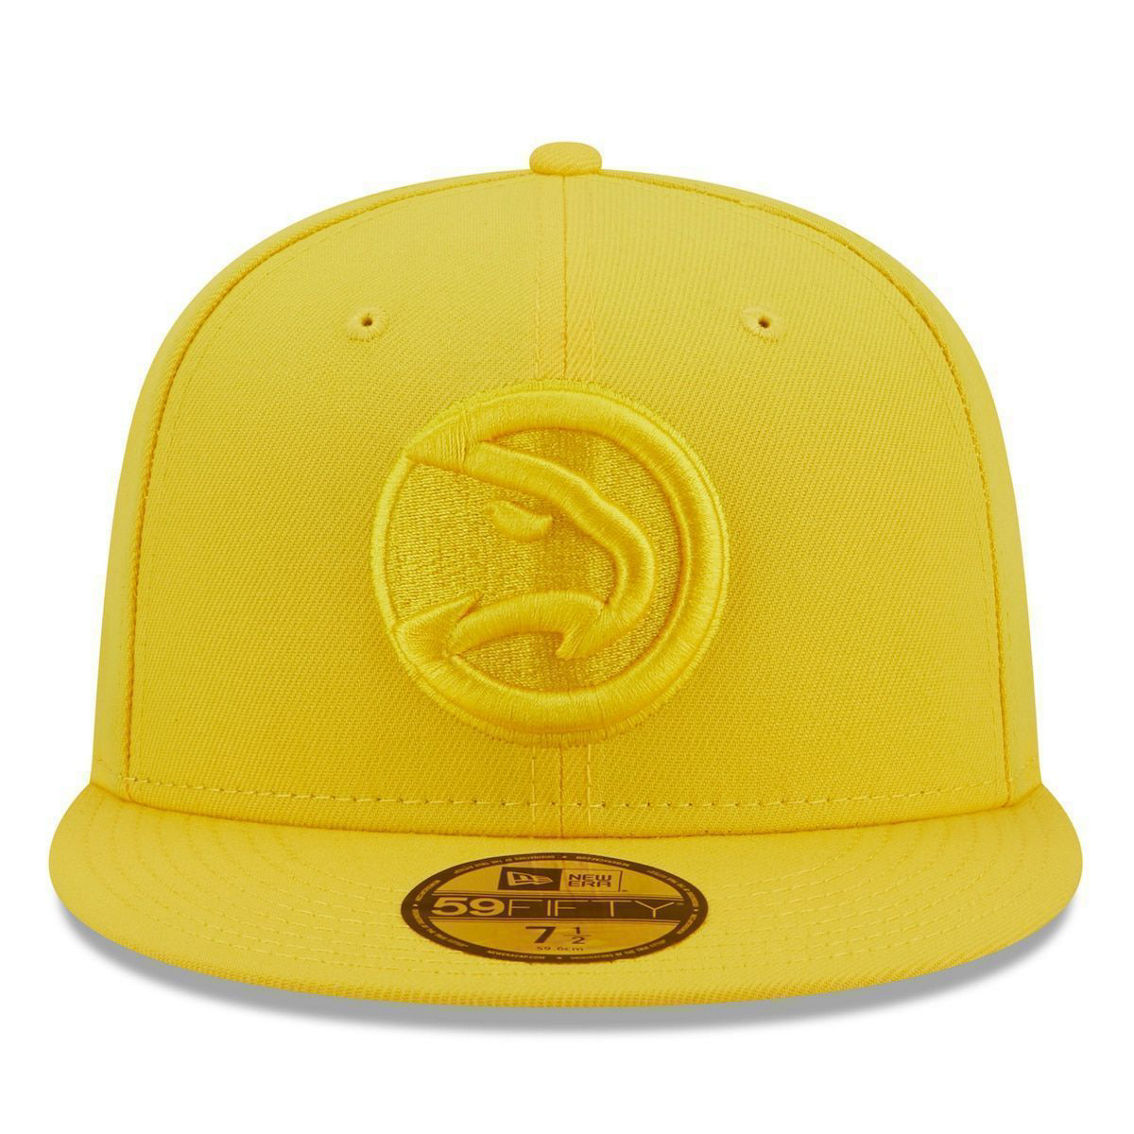 New Era Men's Yellow Atlanta Hawks Color Pack 59FIFTY Fitted Hat - Image 3 of 4